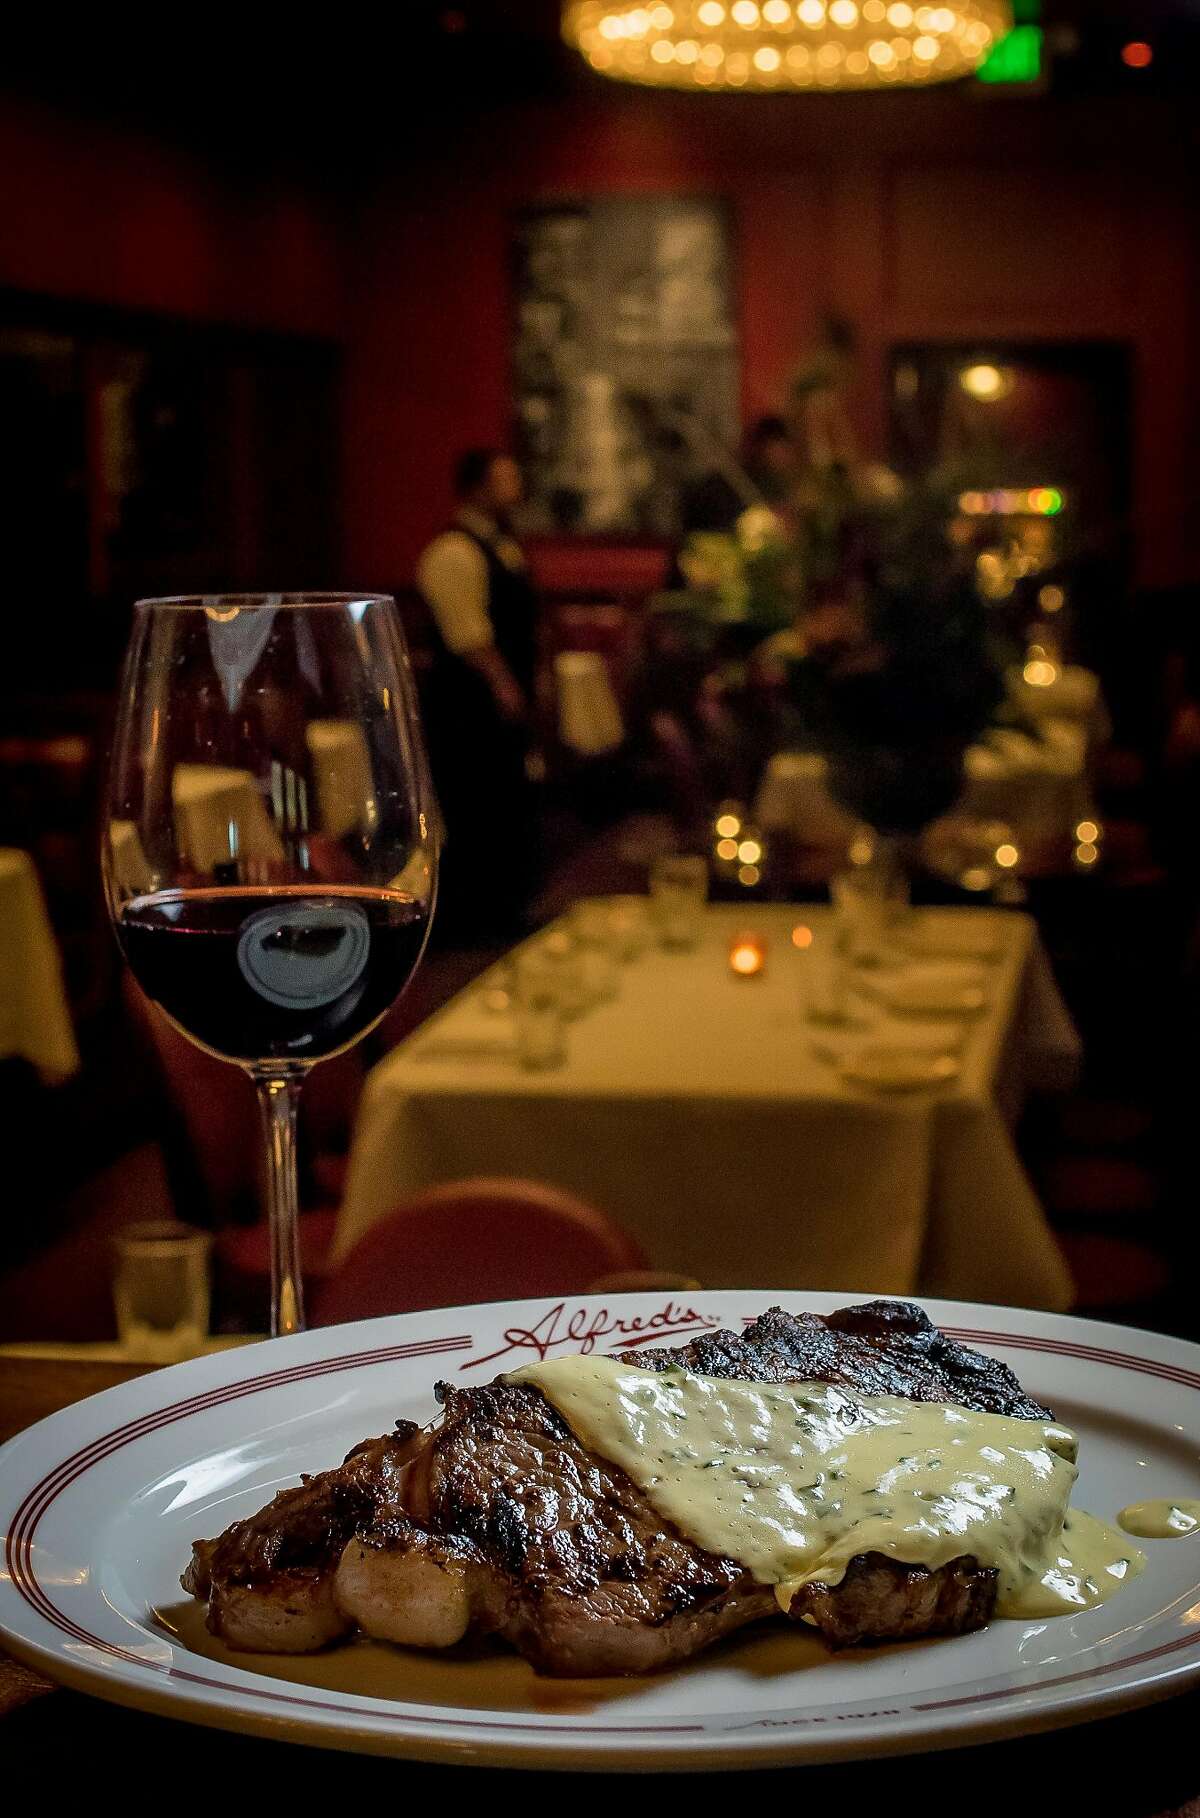 The Ribeye Steak with Brown Butter B�arnaise sauce at Alfred's Steakhouse in San Francisco, Calif., is seen on April 7th, 2016.